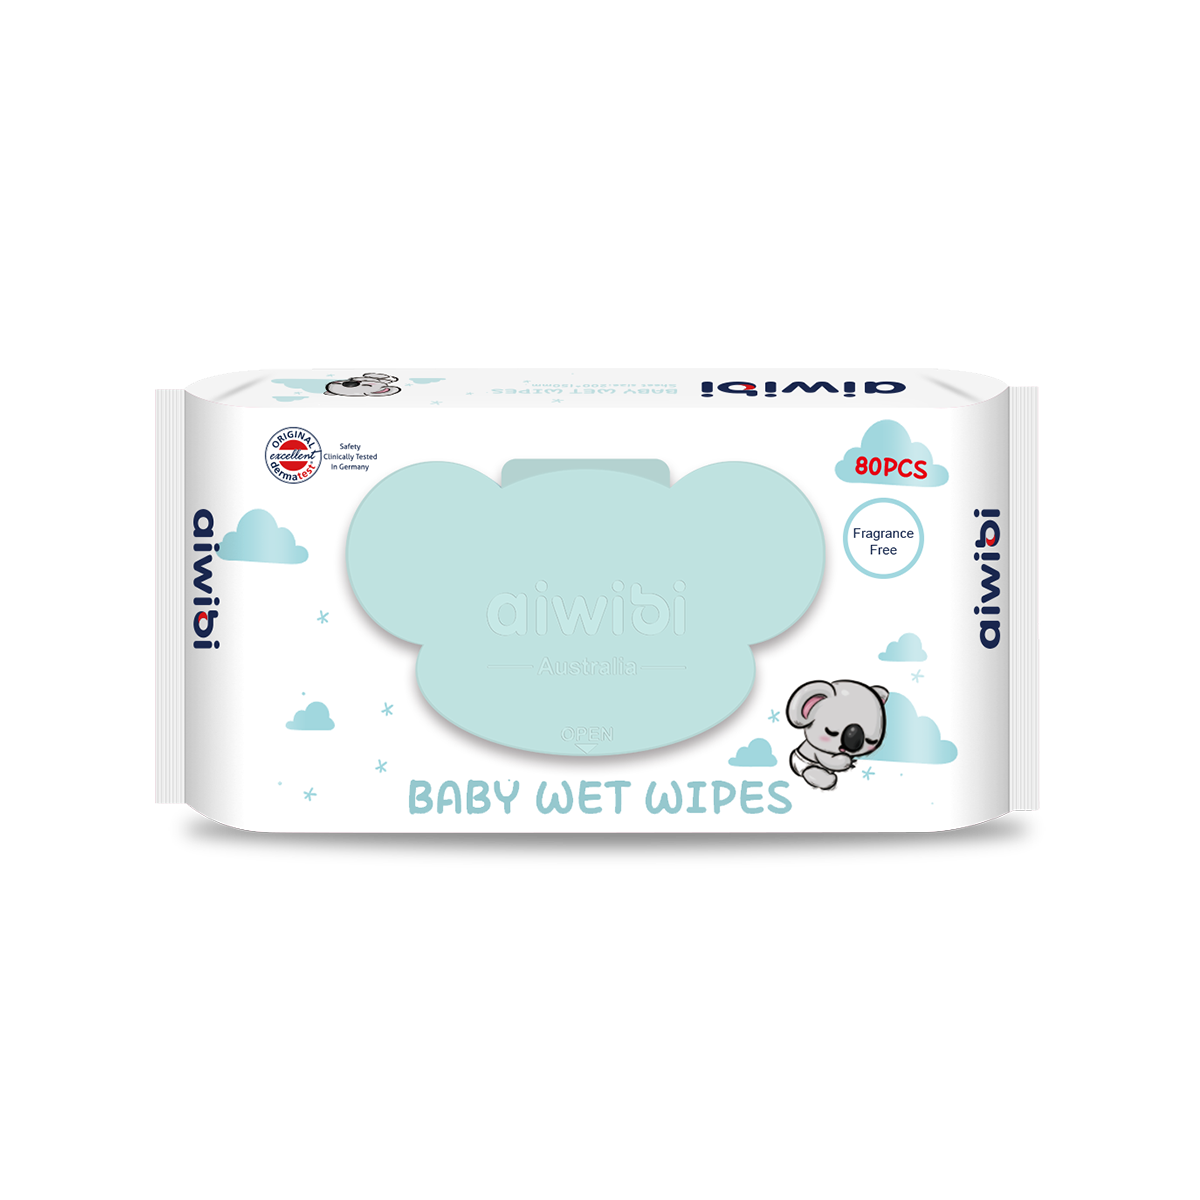 100% Skin-friendly Baby Wet Wipes Unscented 80 Pcs - Koala-shaped Lid - 45gsm Embossed Pearl